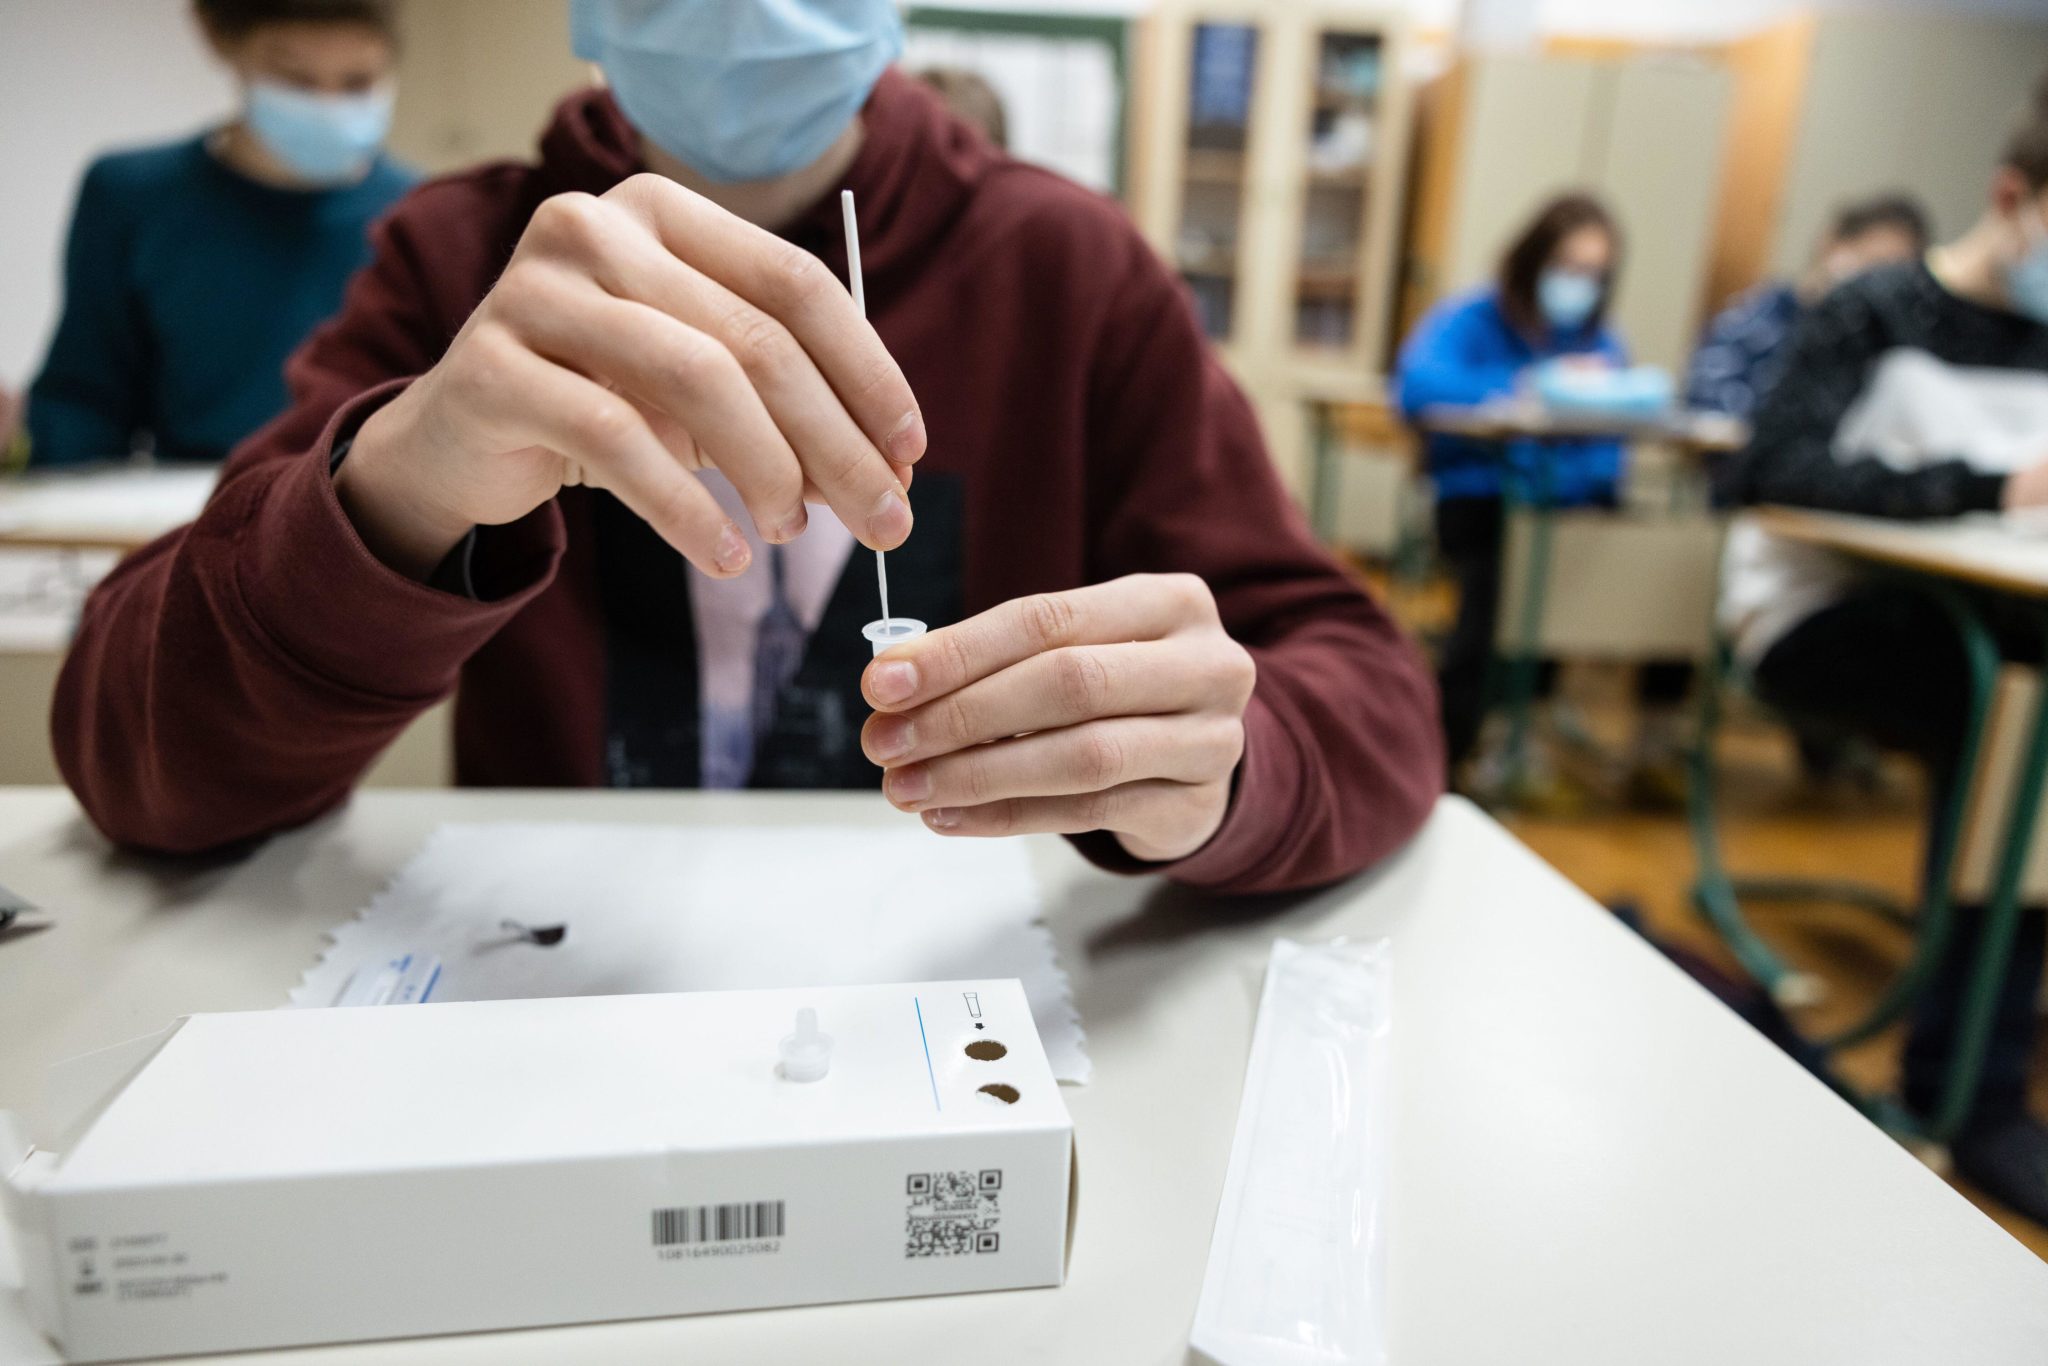 A student self-tests with a rapid COVID-19 antigen kit at a primary school in Slovenia in November 2021